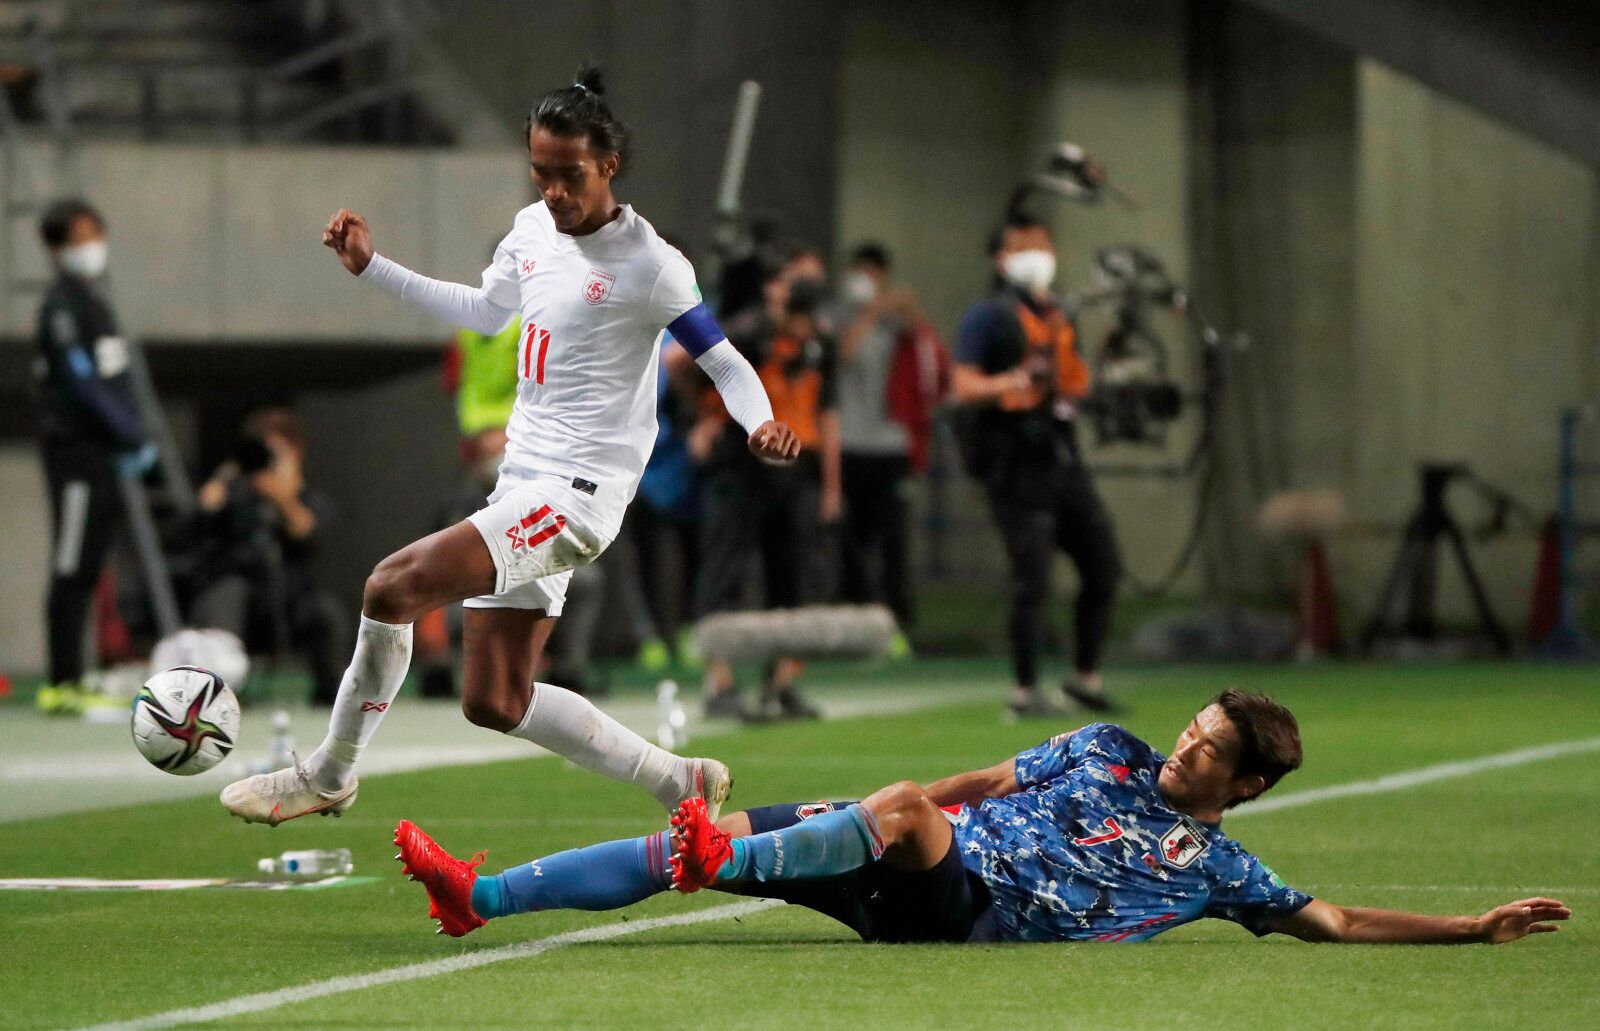 Soccer Football - World Cup - Asia Qualifiers - Second Round - Group F - Japan v Myanmar - Fukuda Denshi Arena, Chiba, Japan - May 28, 2021 Japan's Hidemasa Morita in action with Myanmar's Mg Mg Lwn REUTERS/Issei Kato